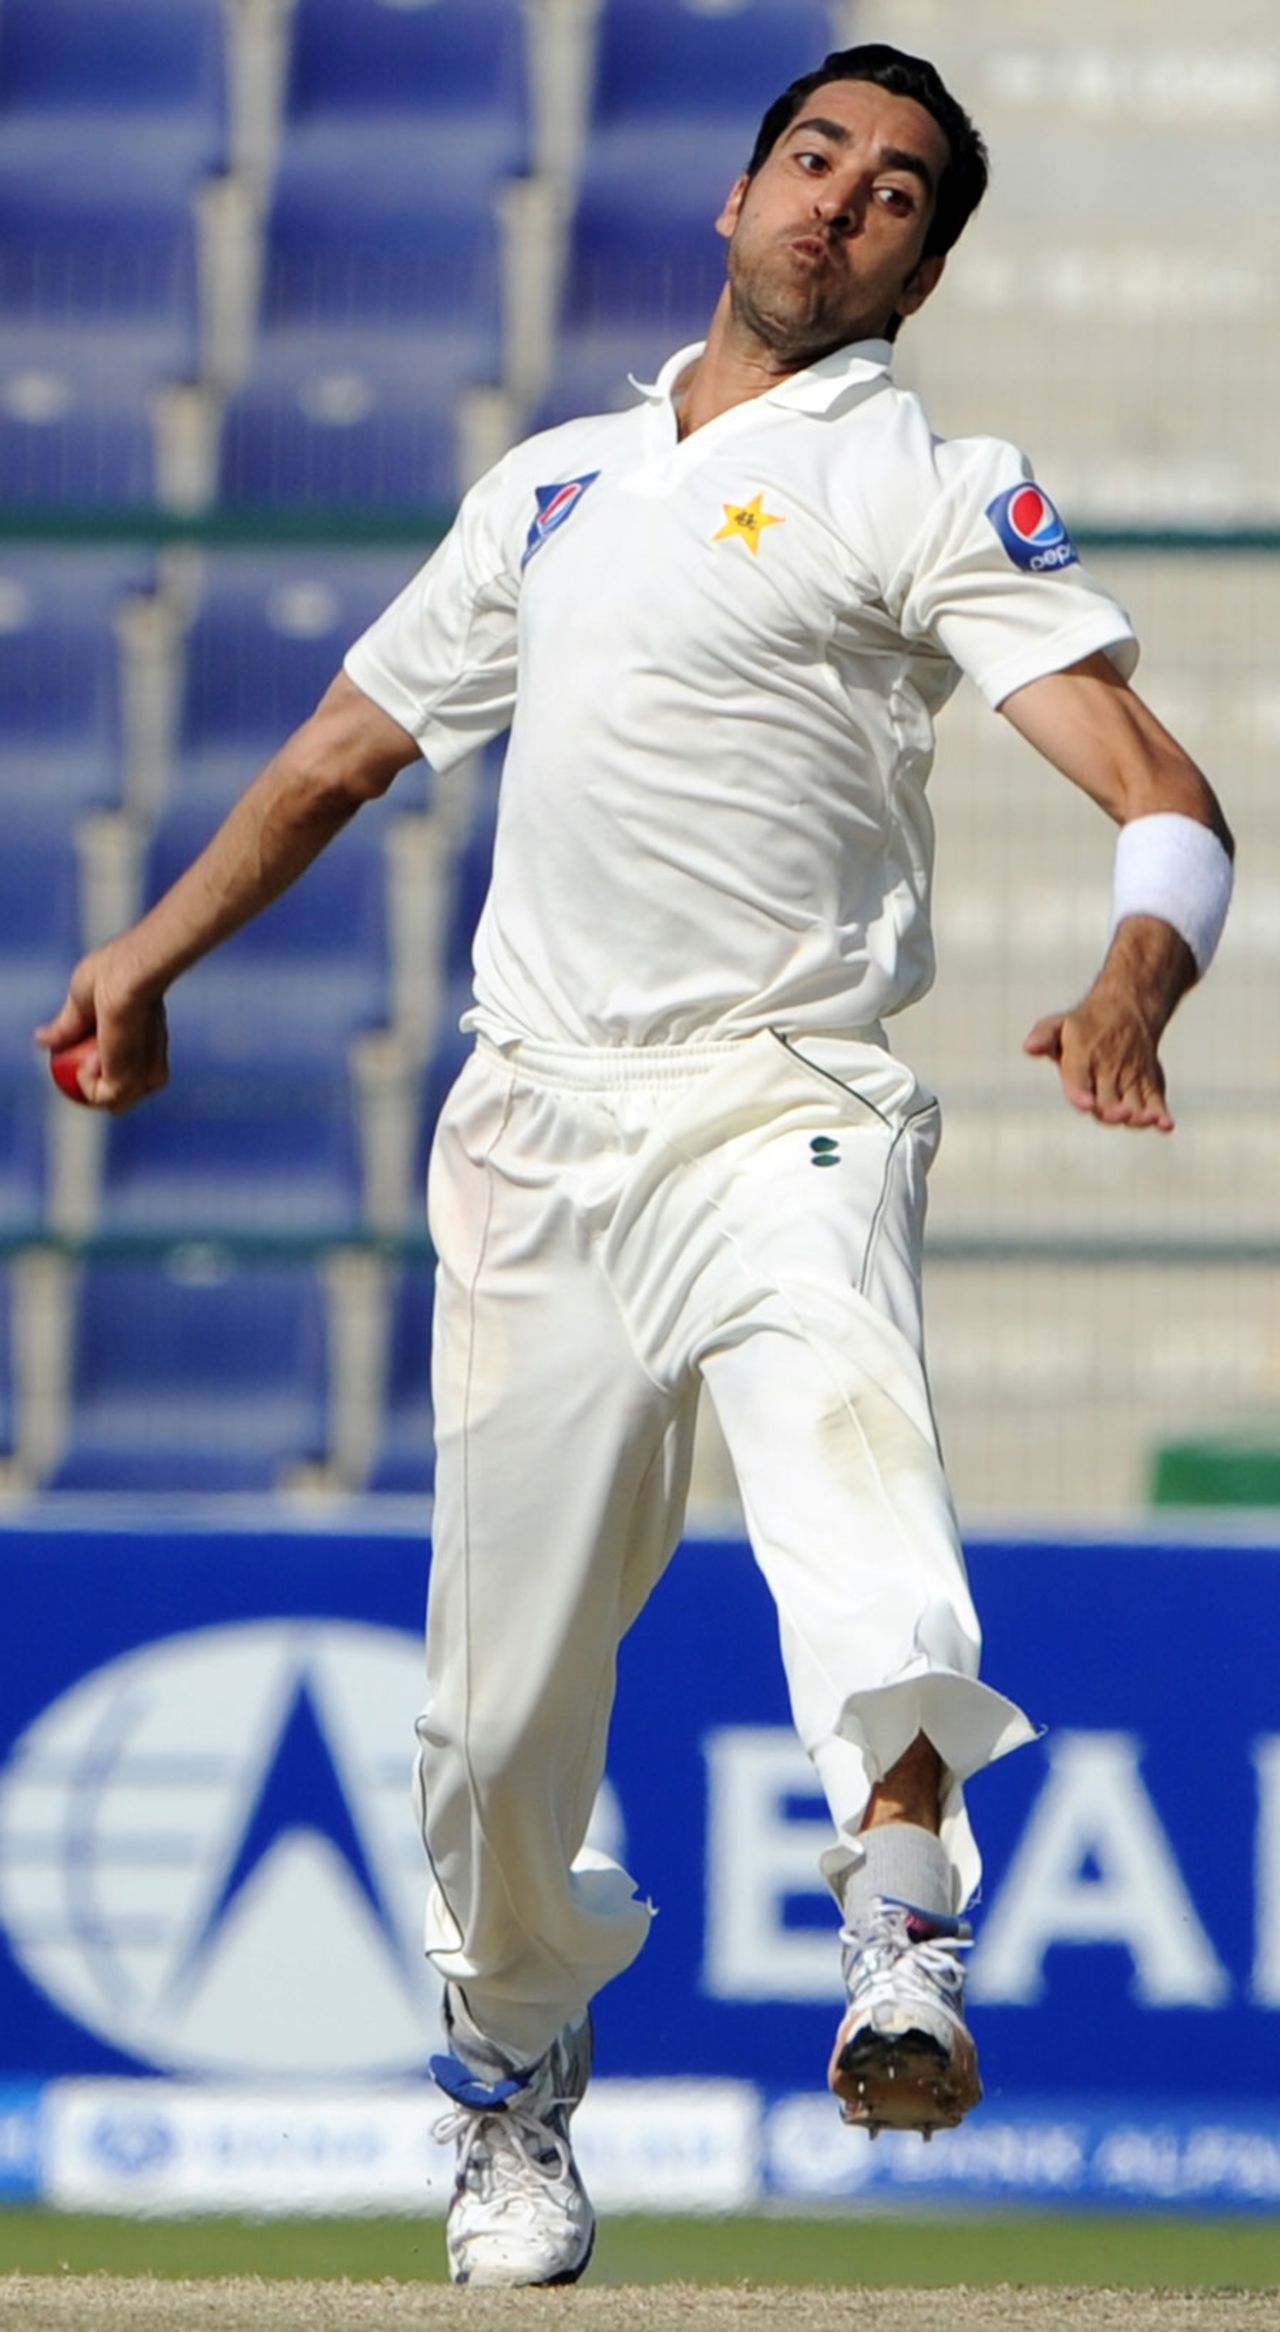 Umar Gul opens the bowling after Pakistan avoided the follow-on, Pakistan v South Africa, 2nd Test, Abu Dhabi, 4th day, November 23, 2010